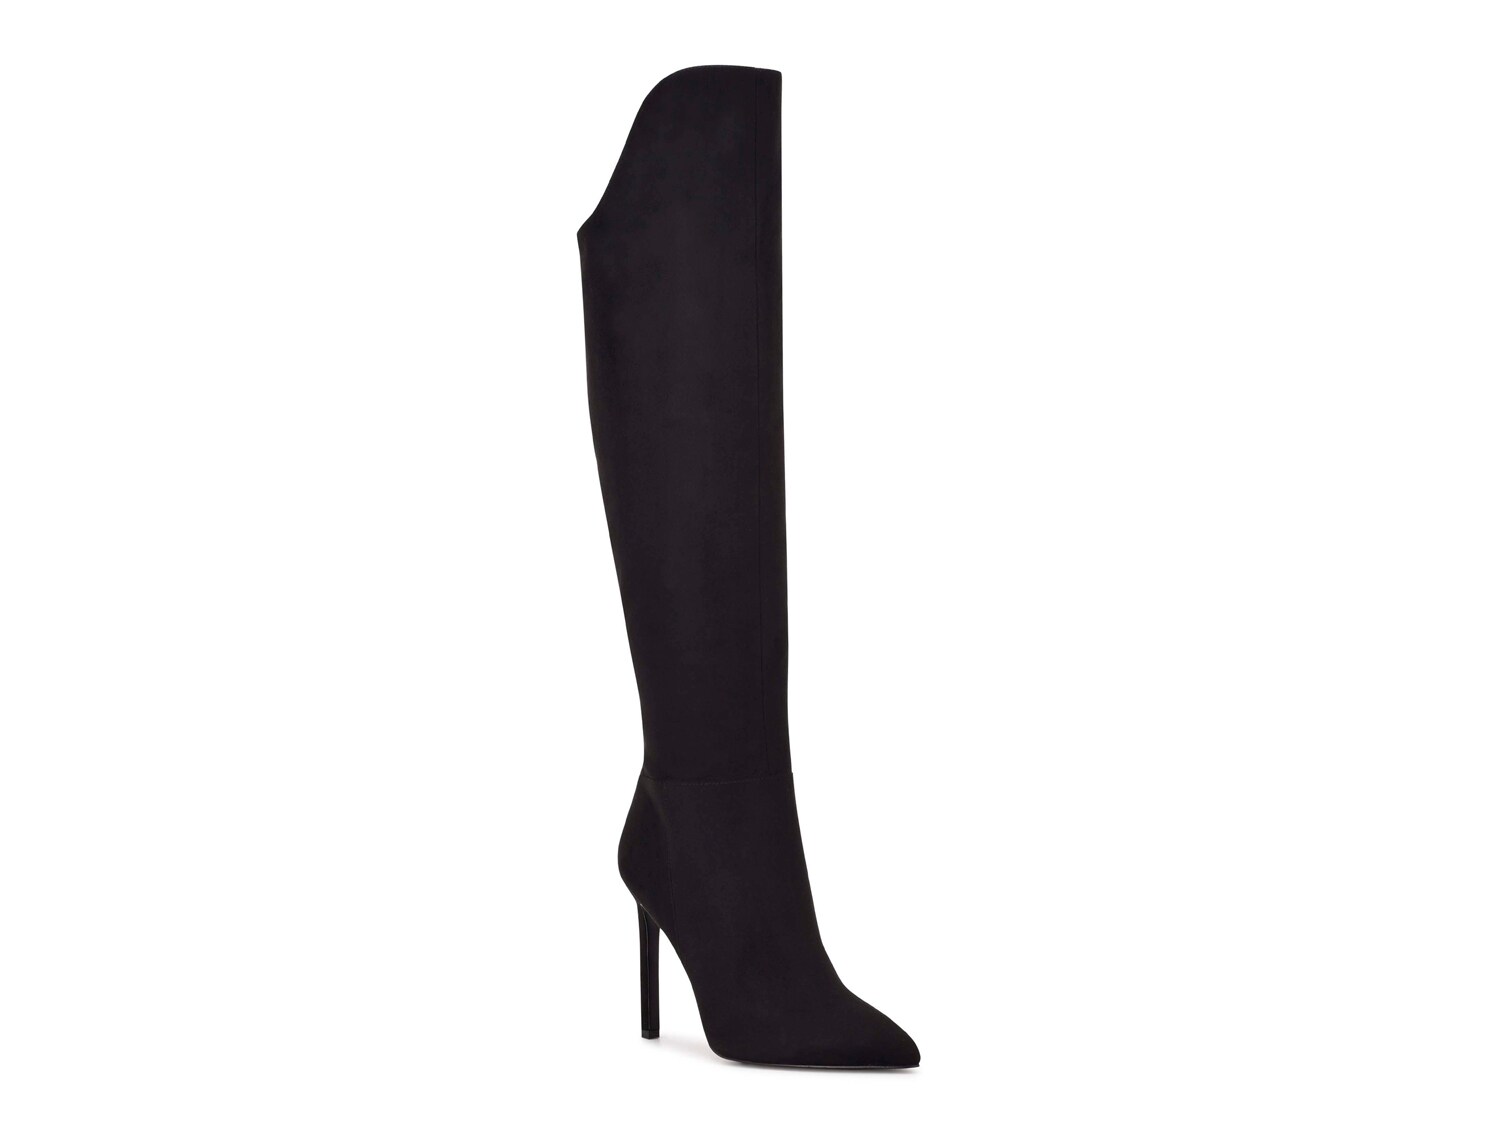 Nine West Teleena 2 Over-the-Knee Boot - Free Shipping | DSW